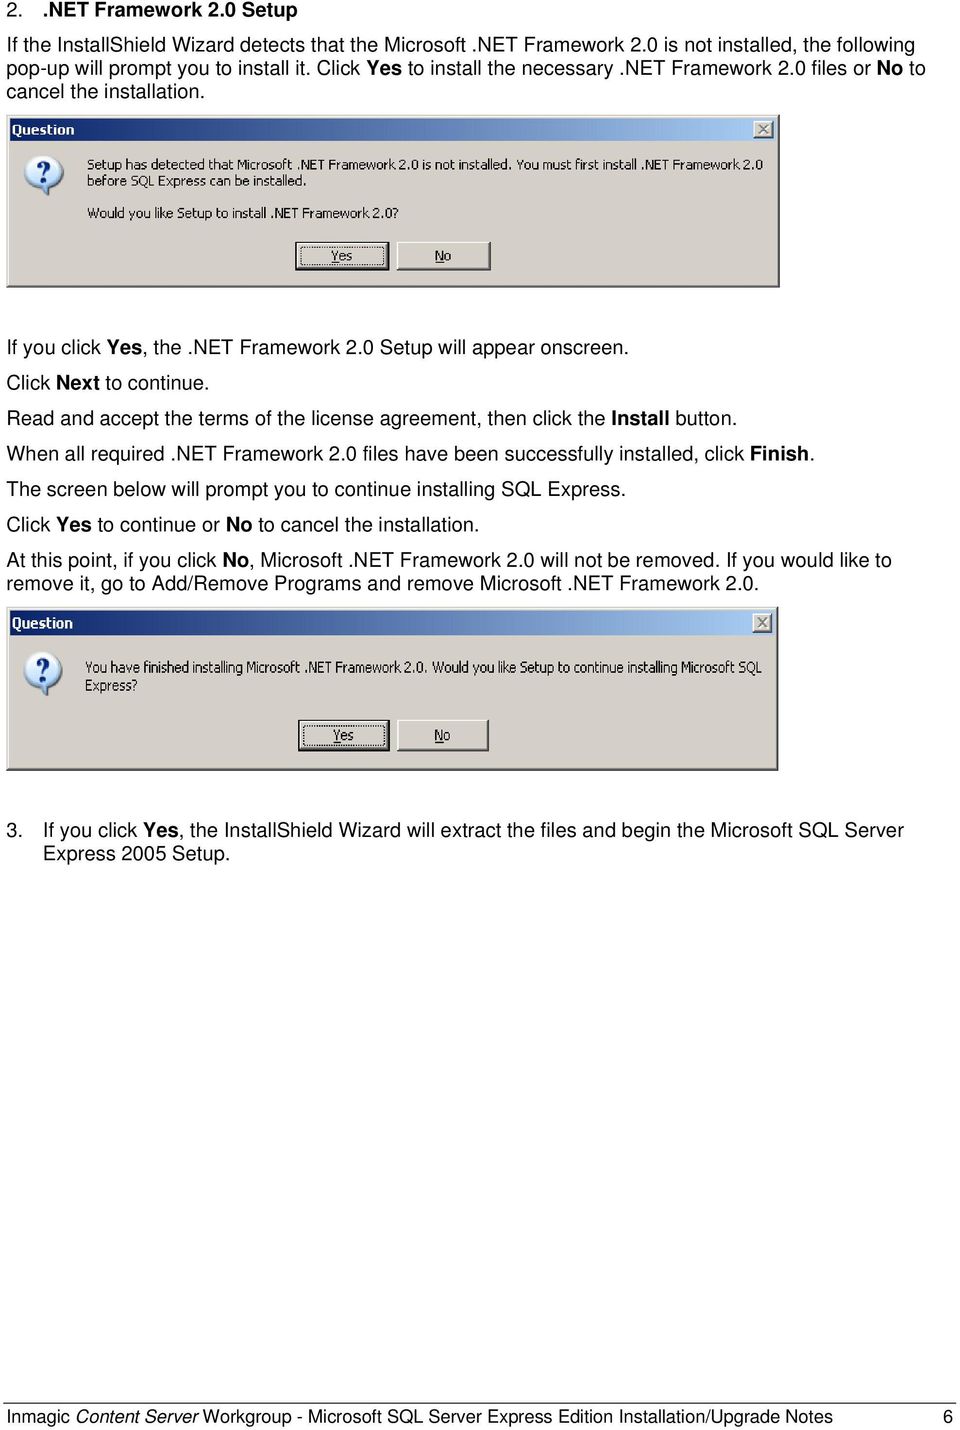 Read and accept the terms of the license agreement, then click the Install button. When all required.net Framework 2.0 files have been successfully installed, click Finish.